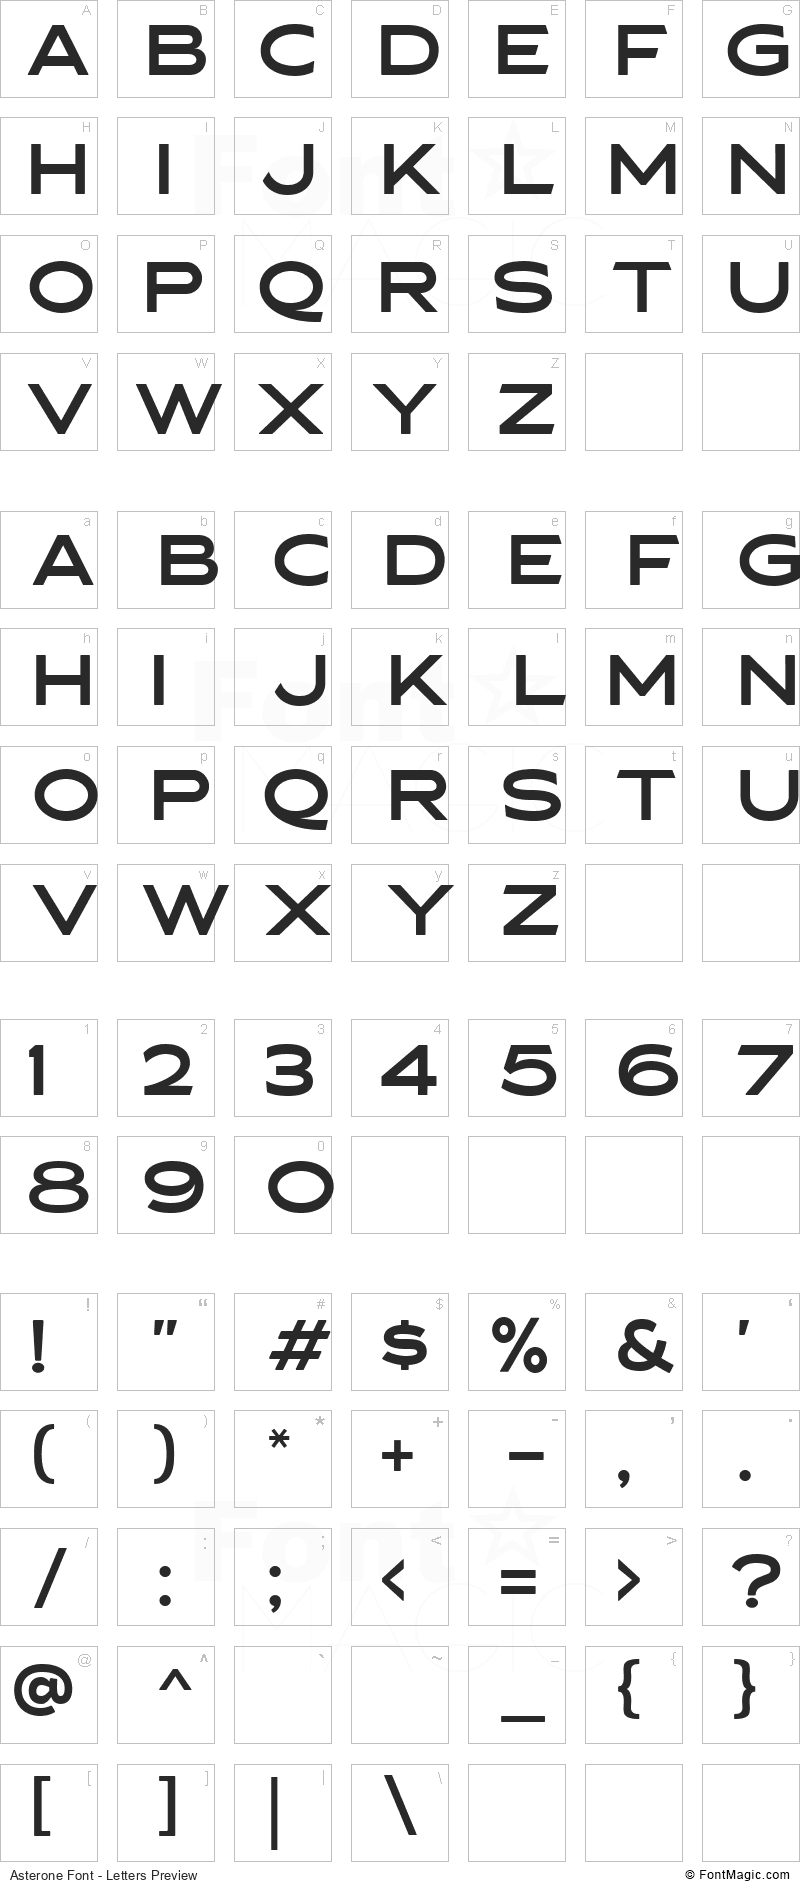 Asterone Font - All Latters Preview Chart